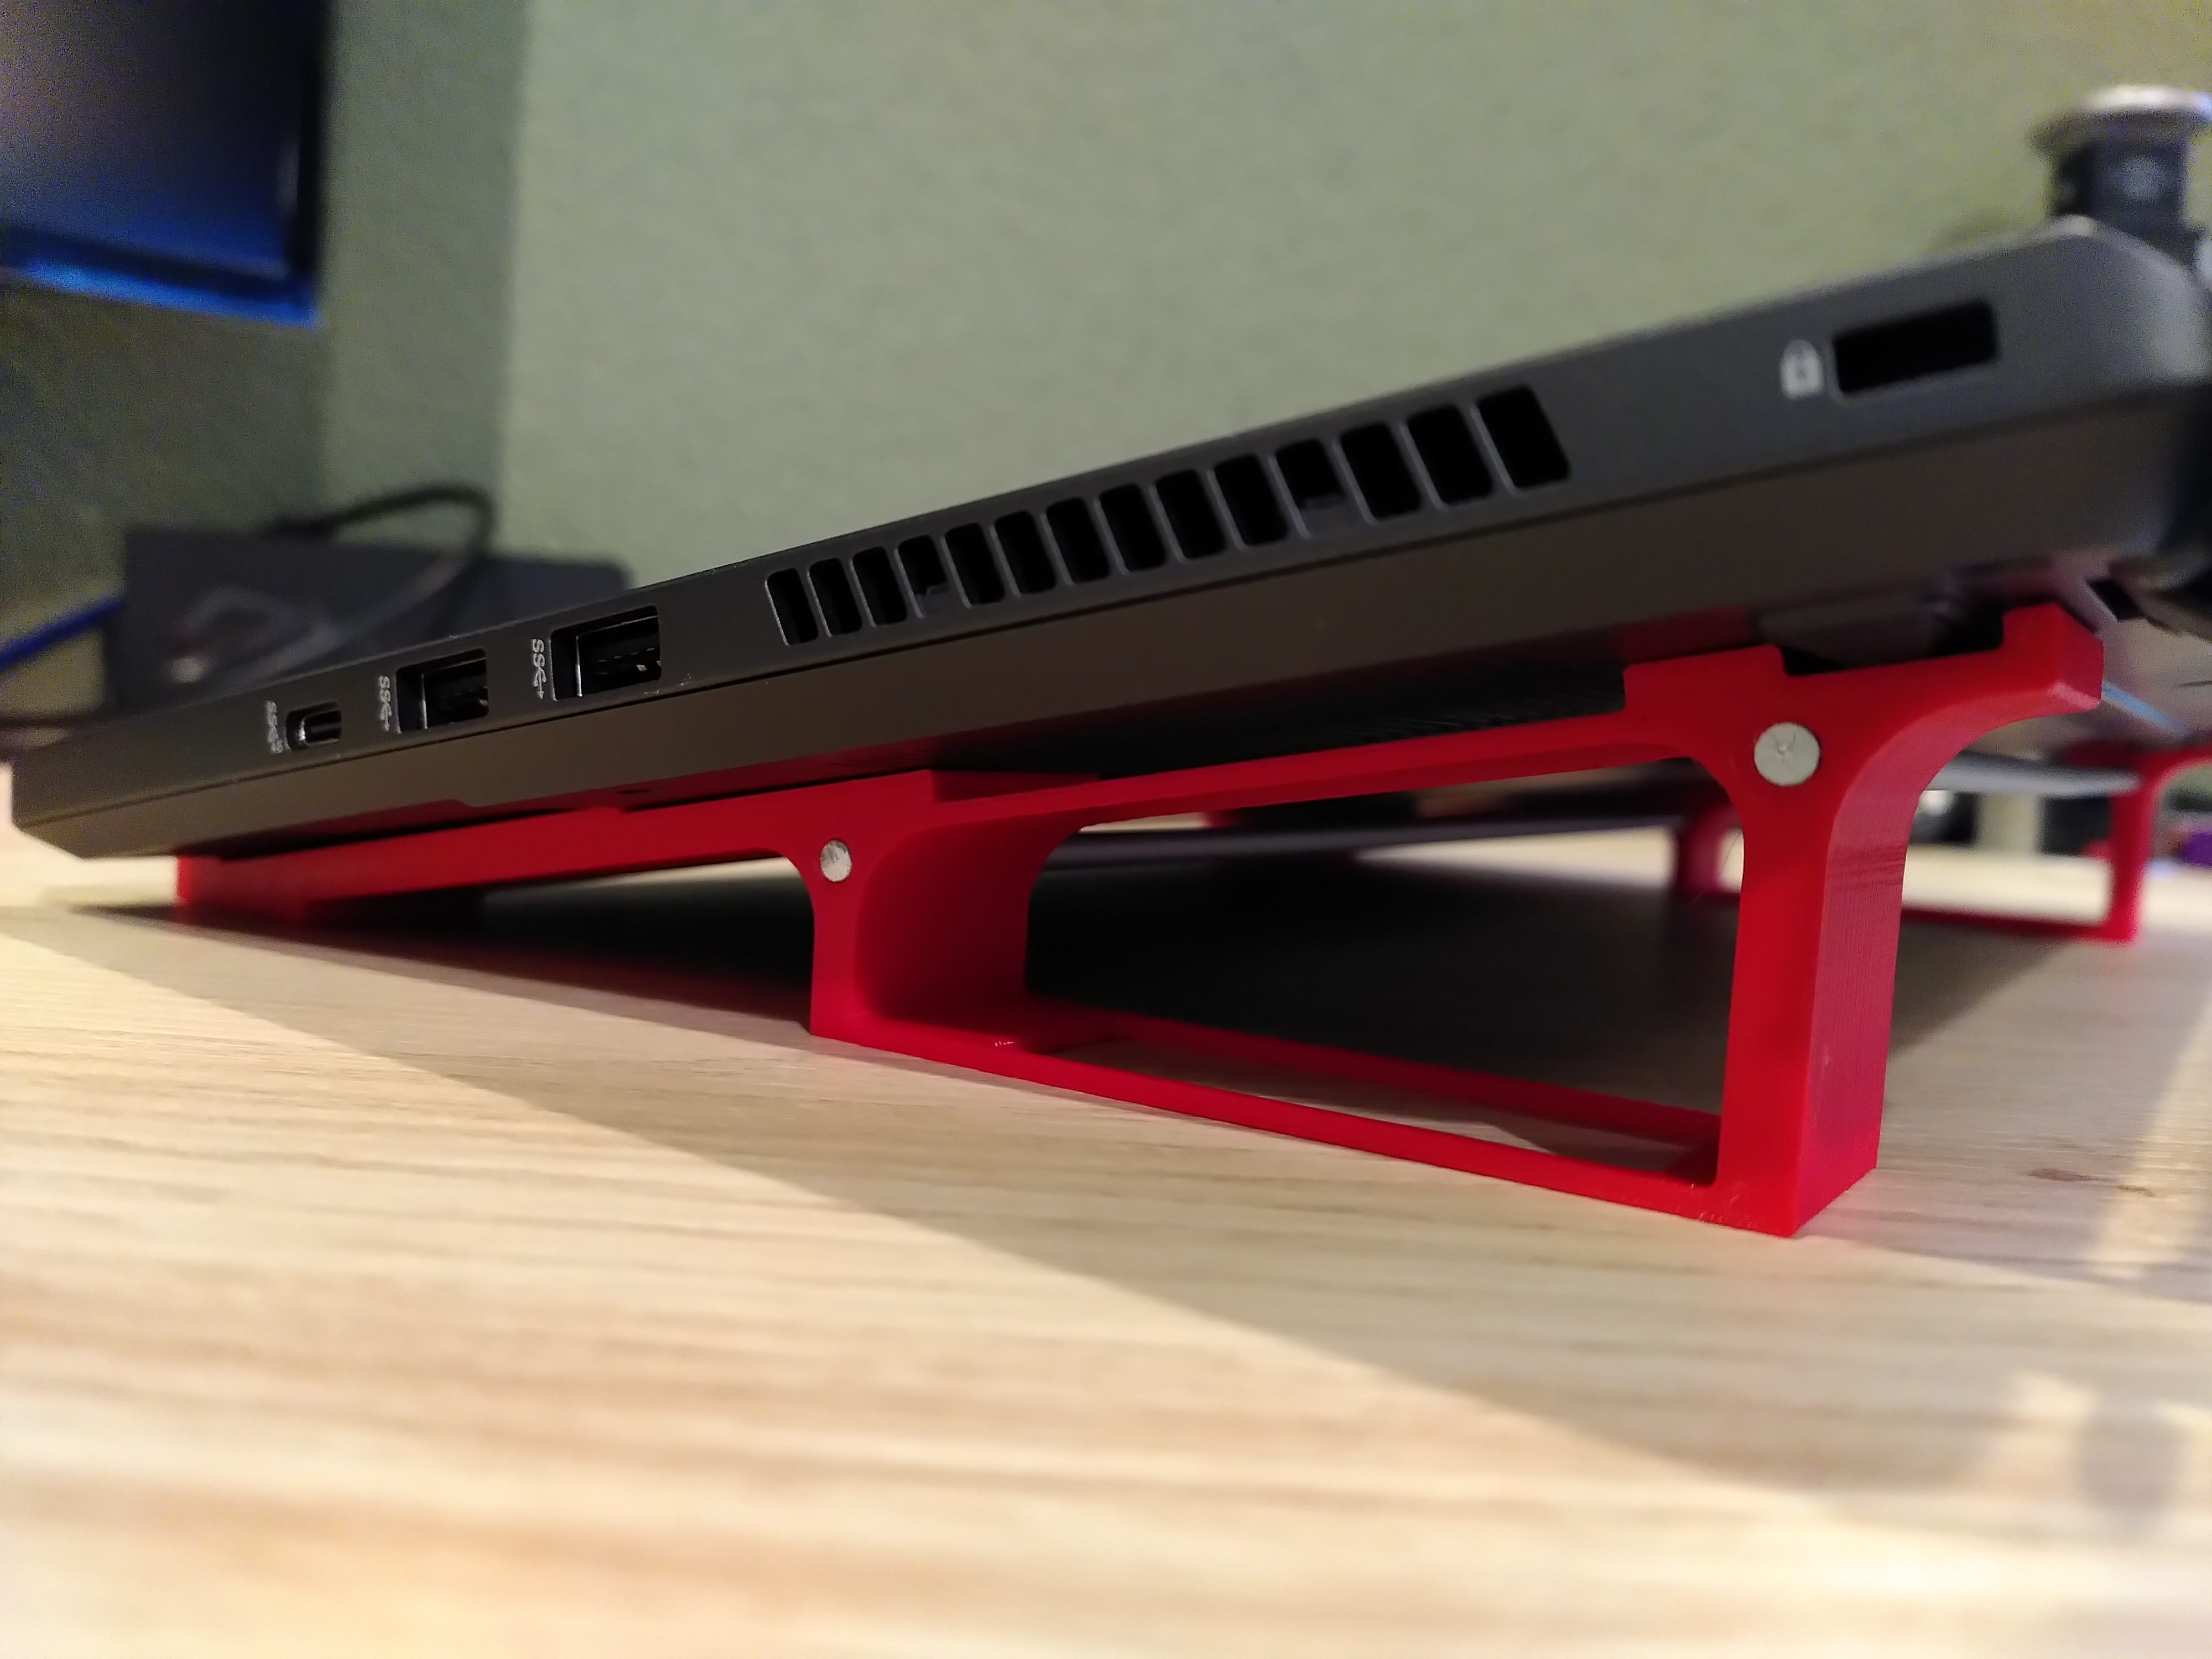 Asus Zephyrus G14 stand